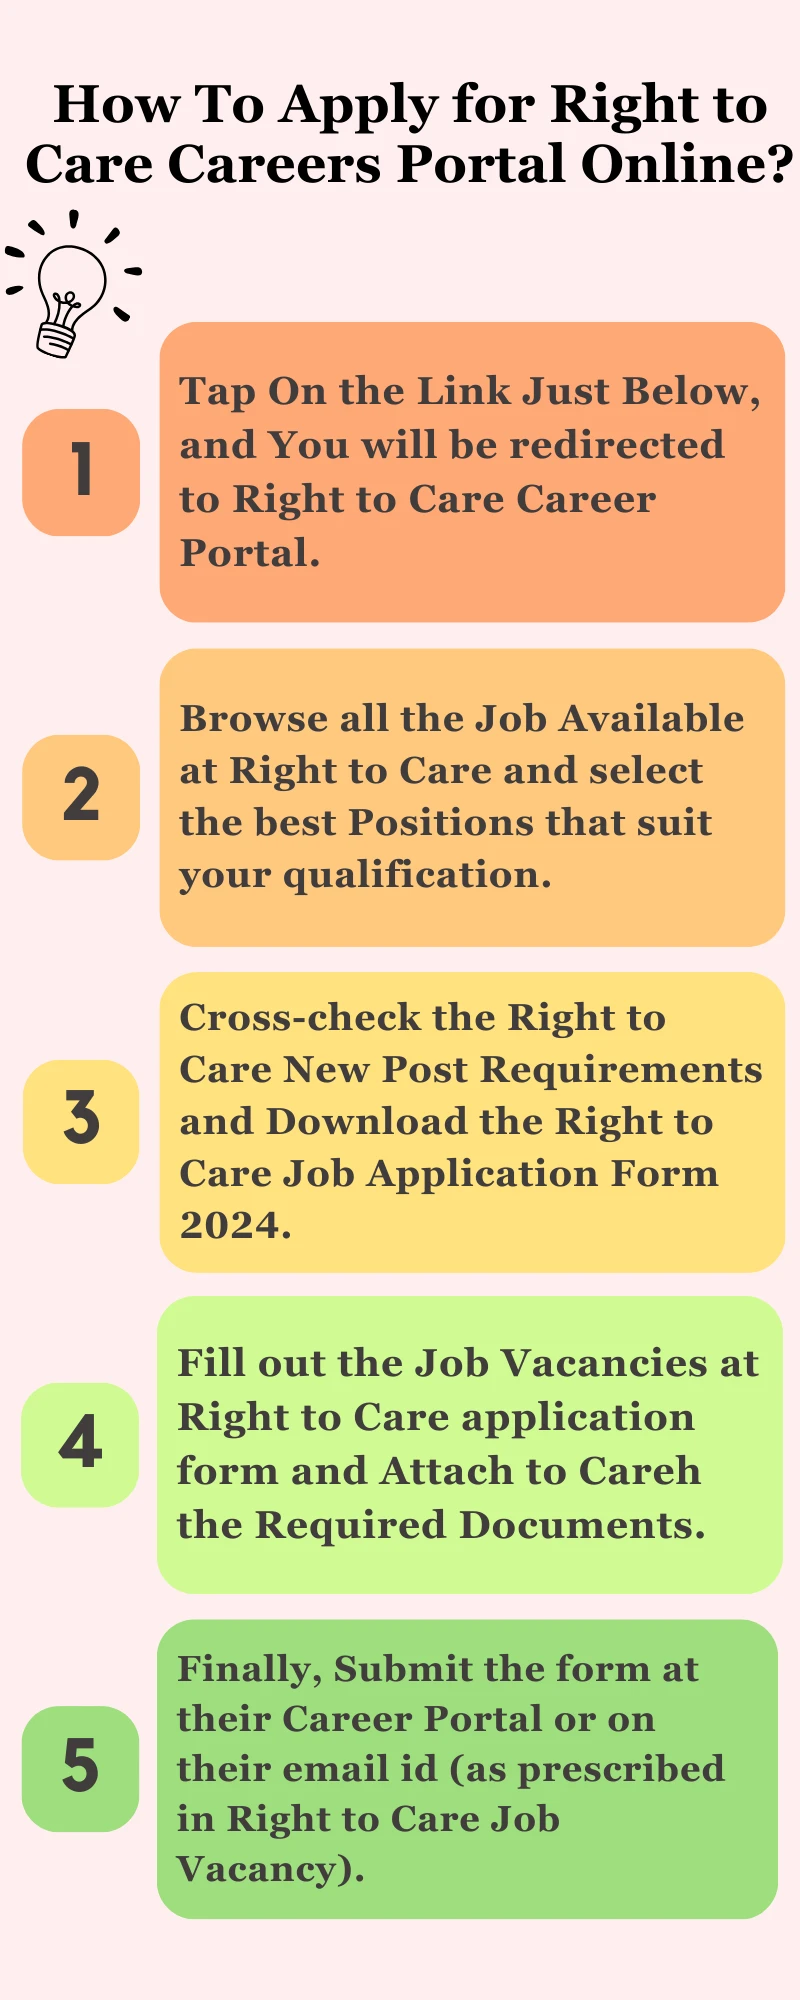 How To Apply for Right to Care Careers Portal Online?